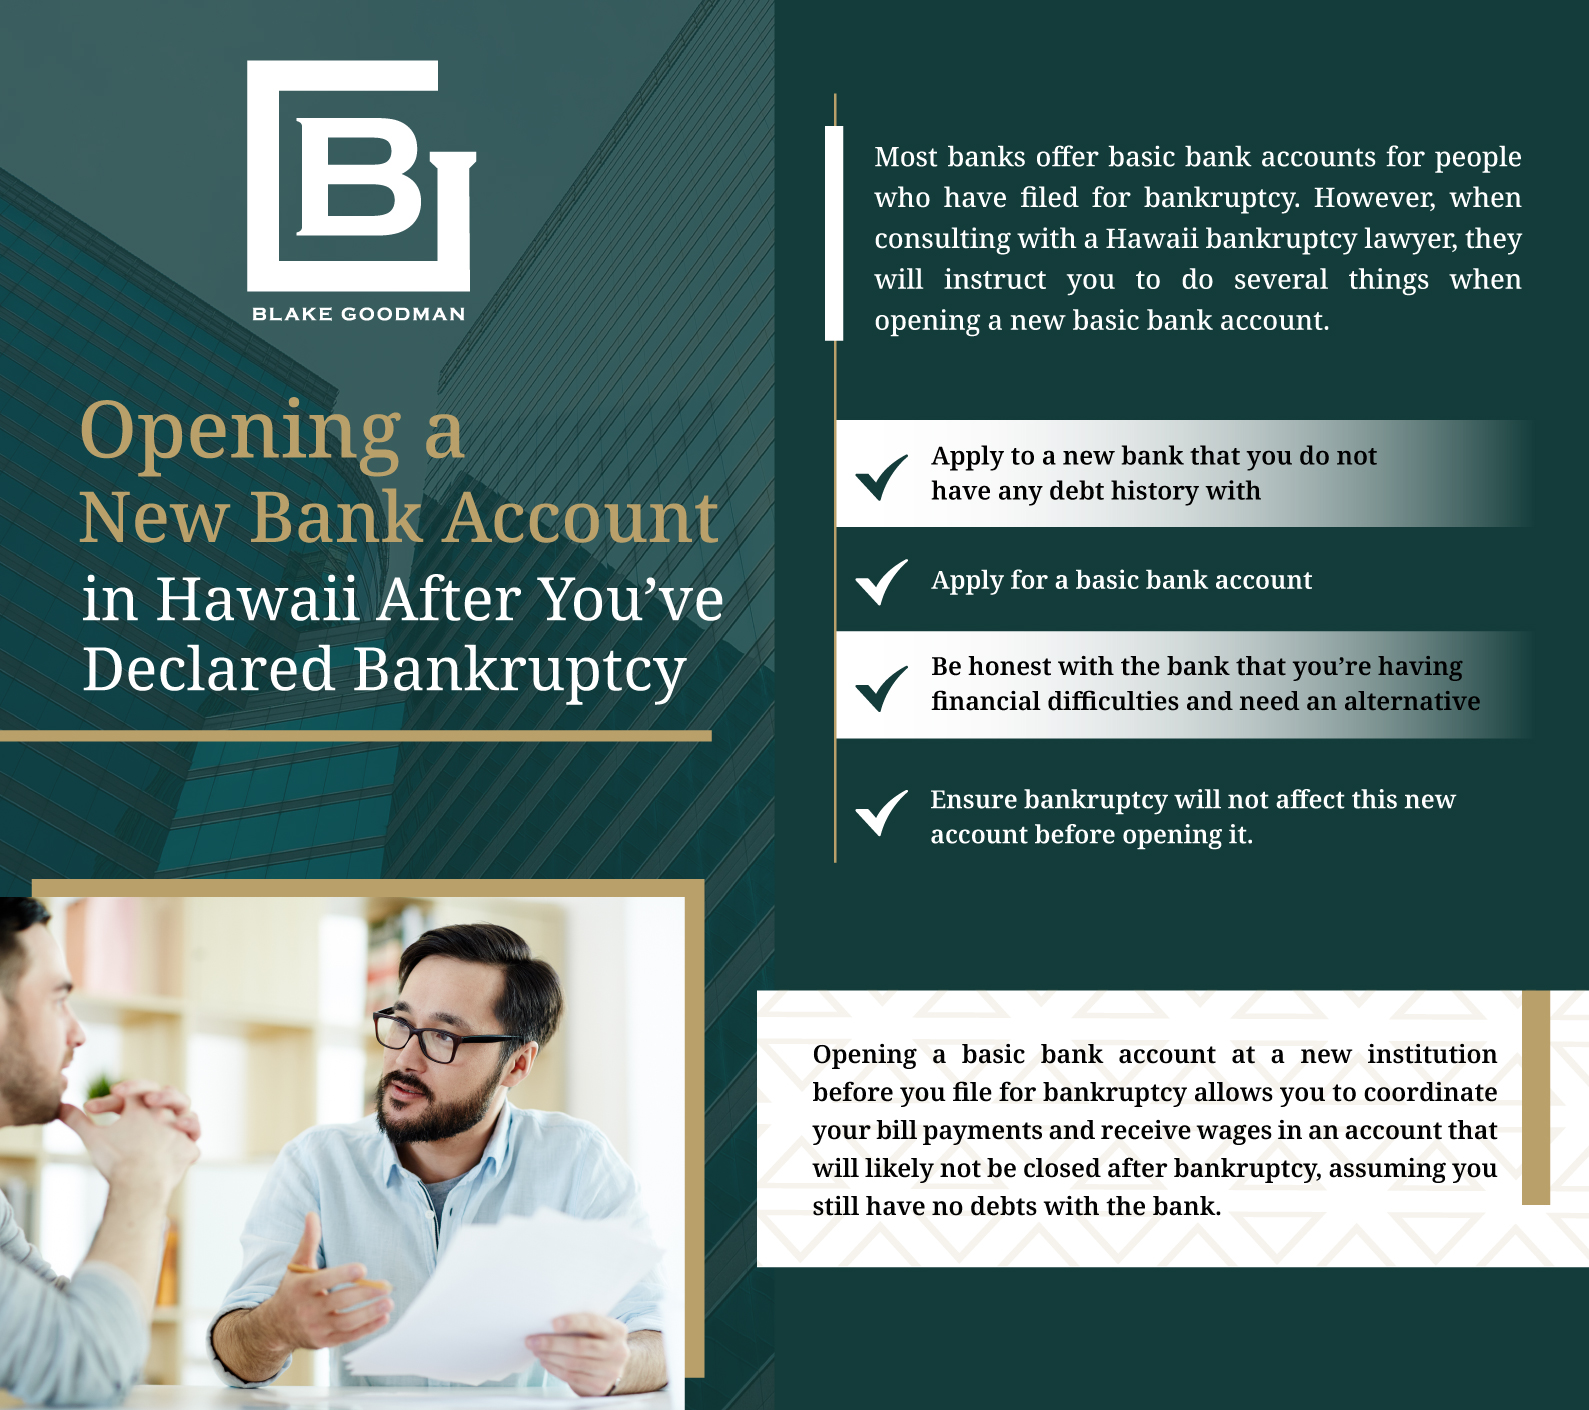 An infographic that shows how to open a new bank account